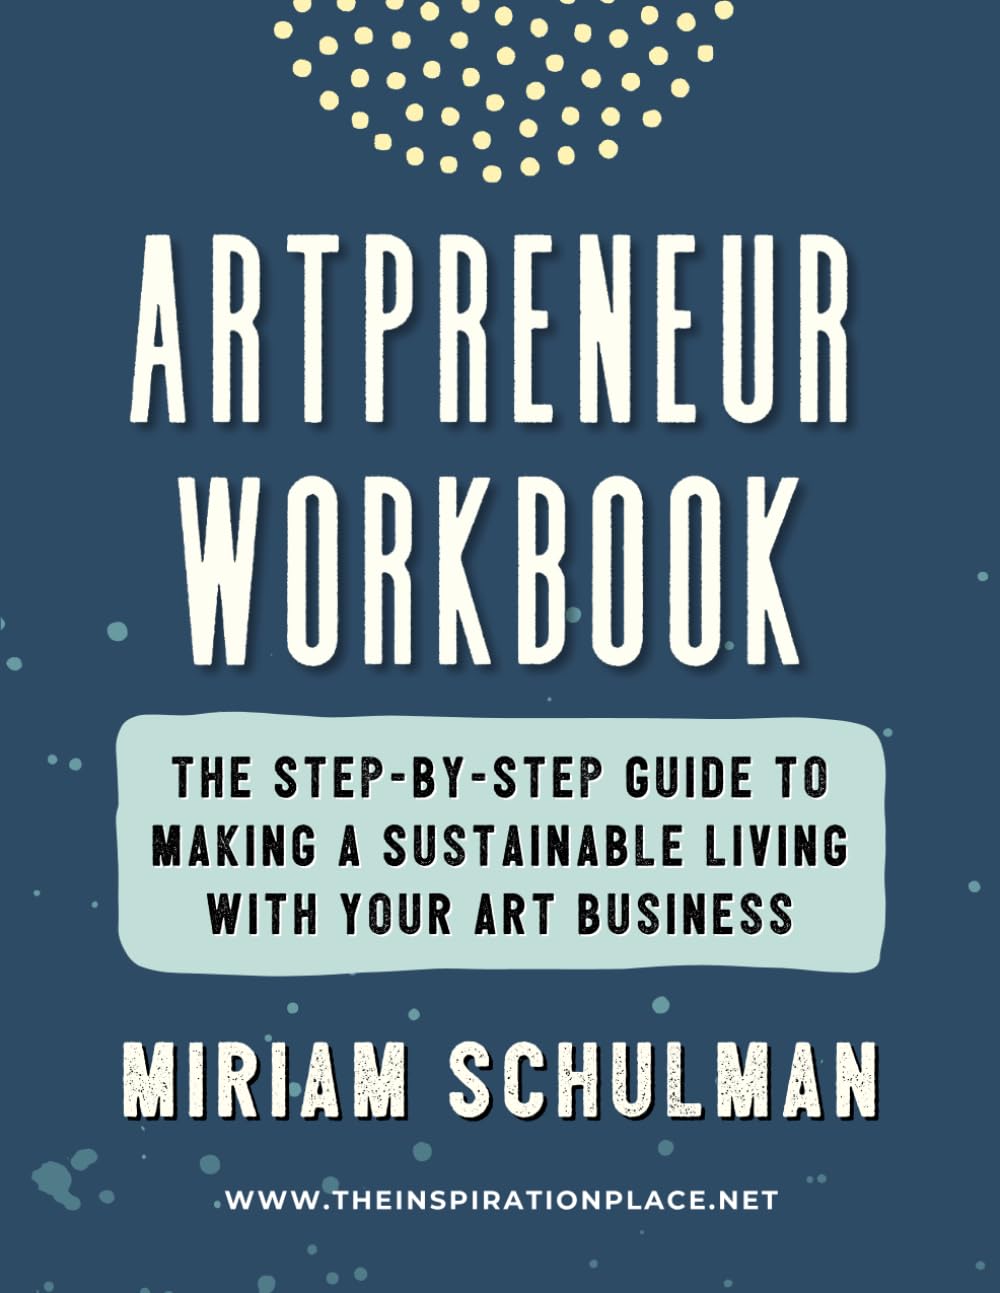 Artpreneur Workbook: The Step-by-Step Guide to Making a Sustainable Living with Your Art Business